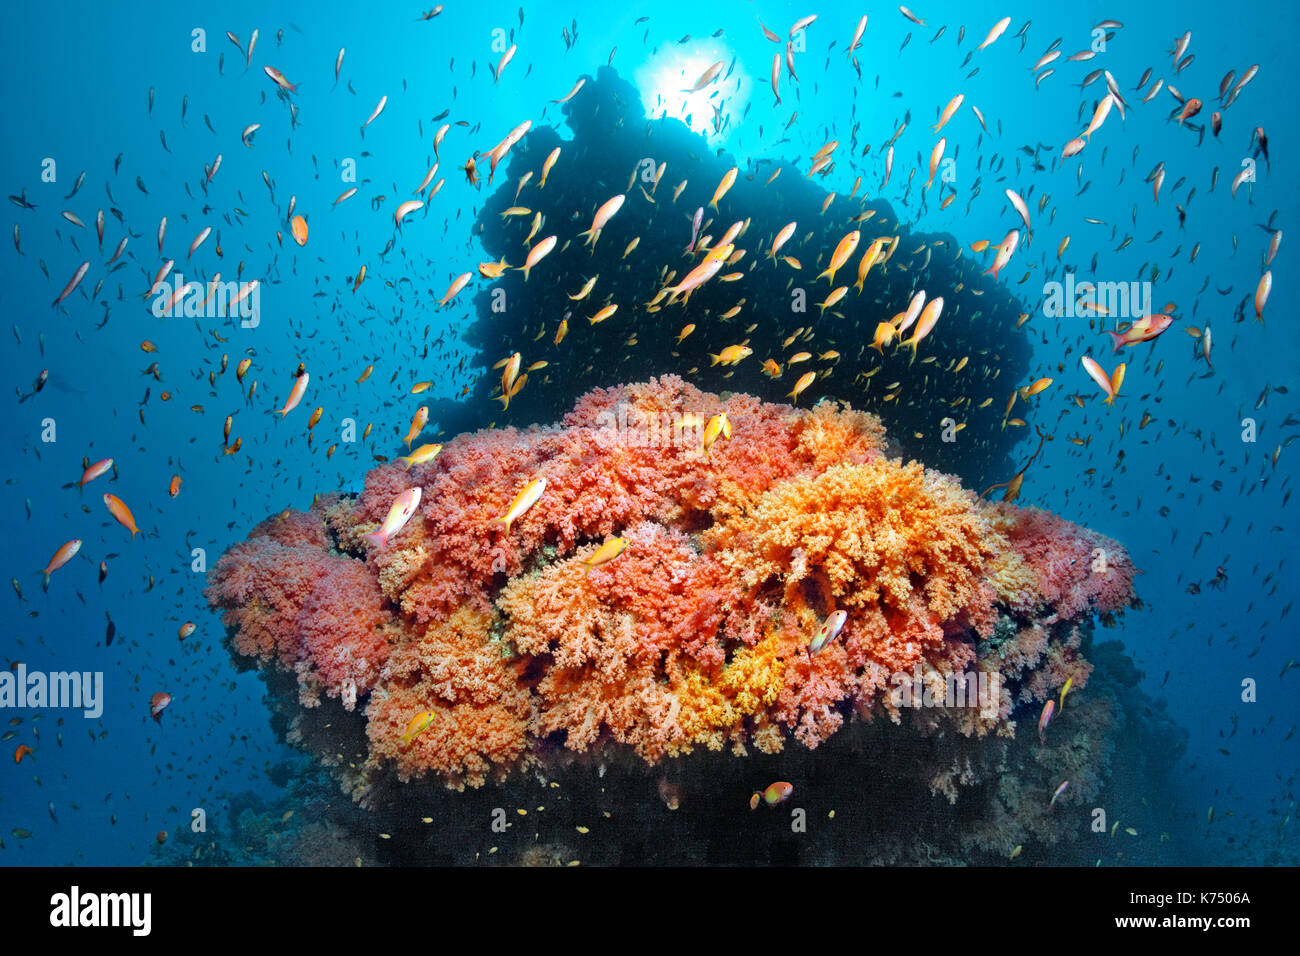 Coral reef, coral block, various red soft corals (Dendronephthya sp.) and swarm of Anthia (Pseudanthias sp.) Stock Photo